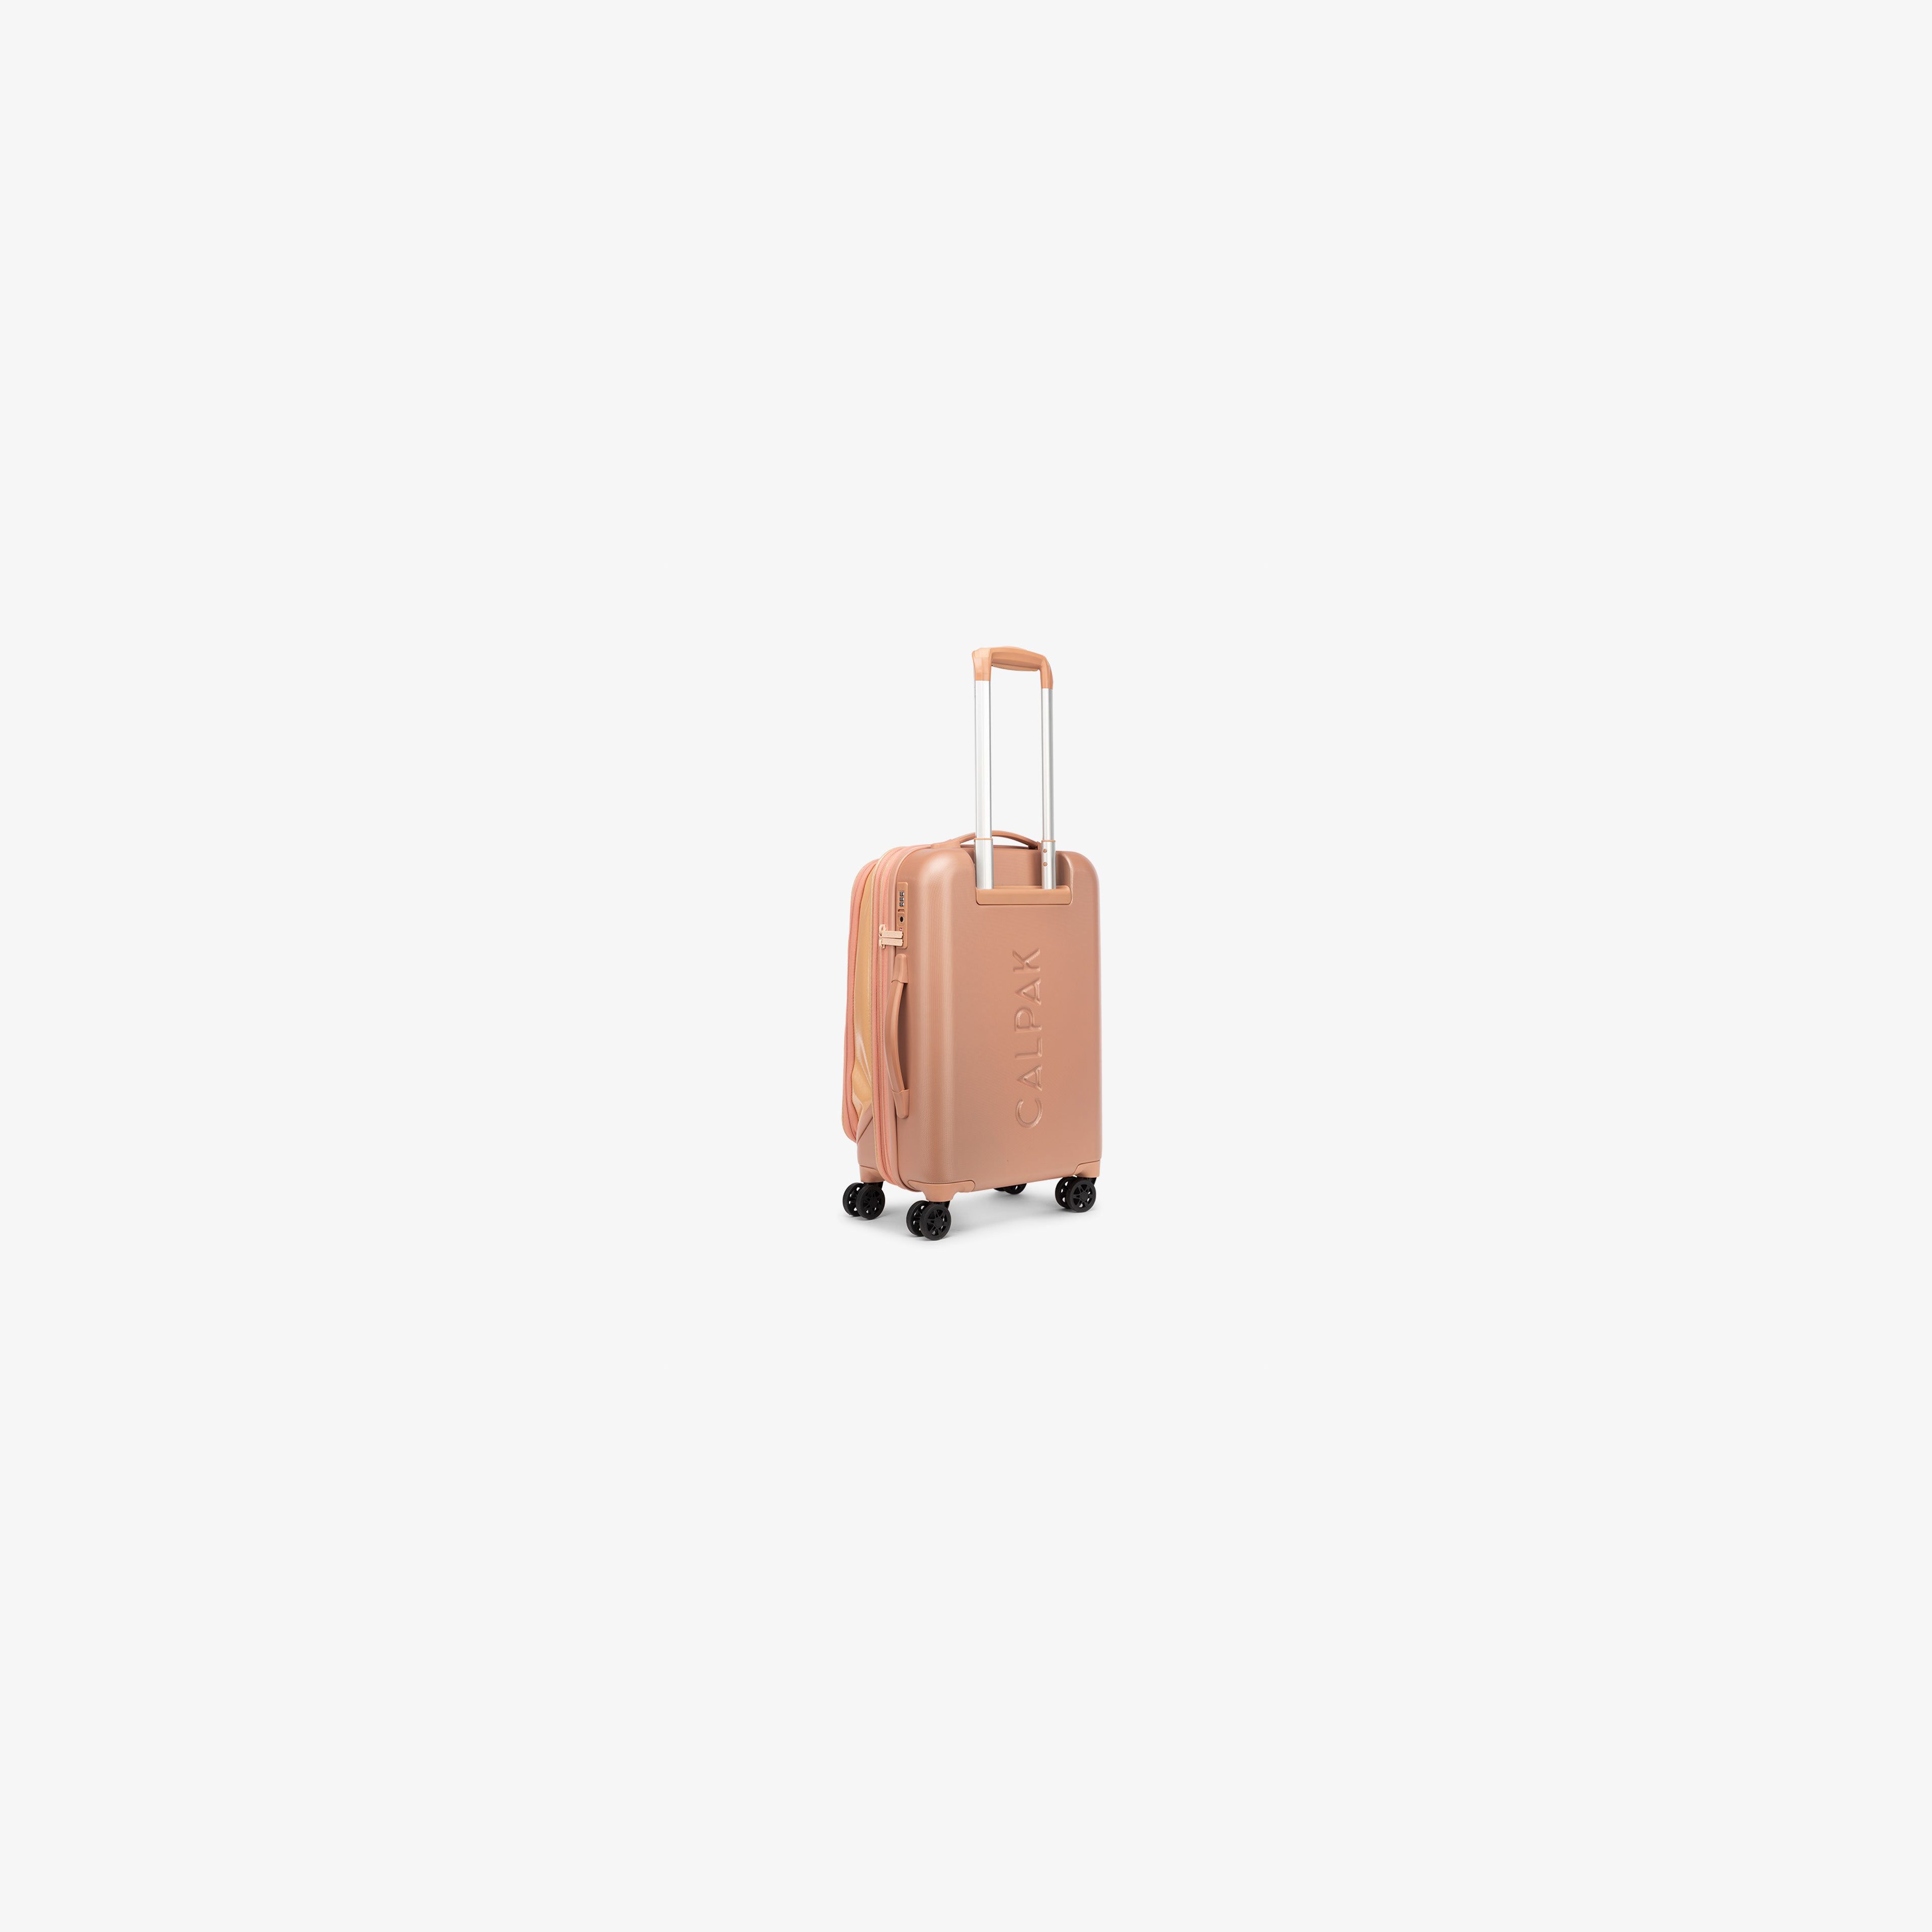 Terra 45L Carry-On Luggage